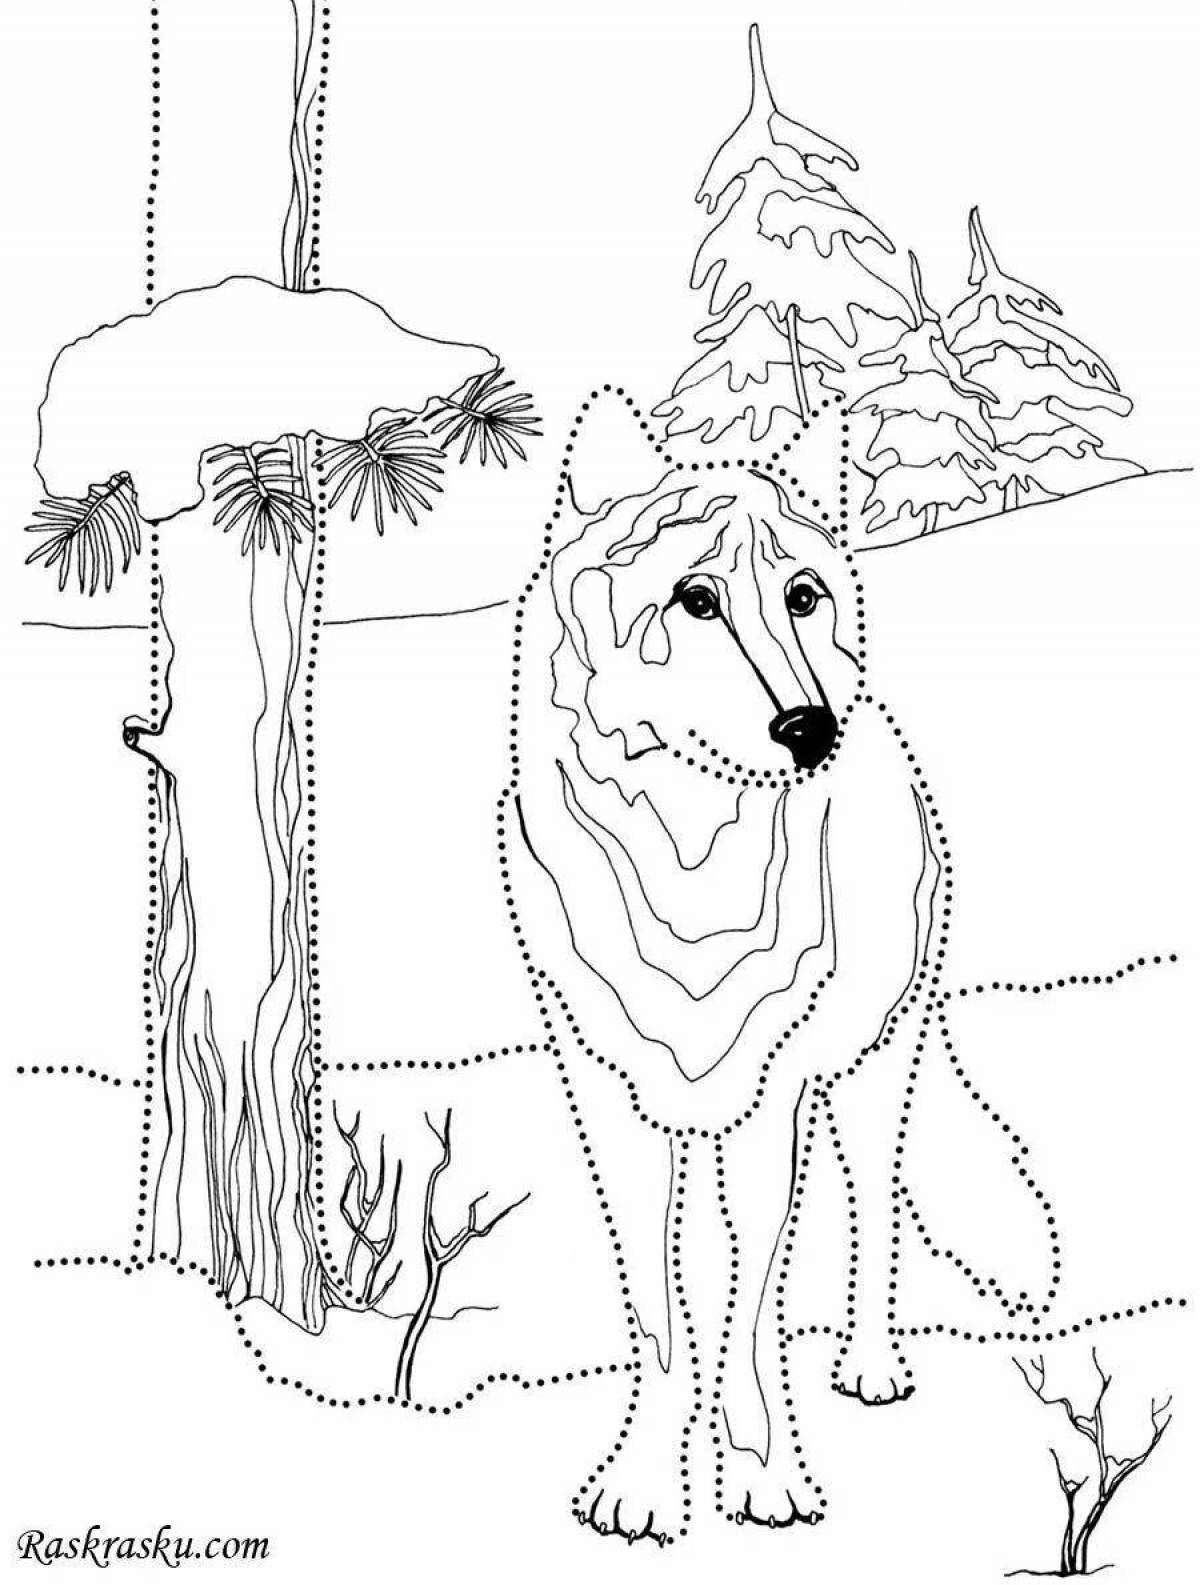 Coloring serene animals in the forest in winter